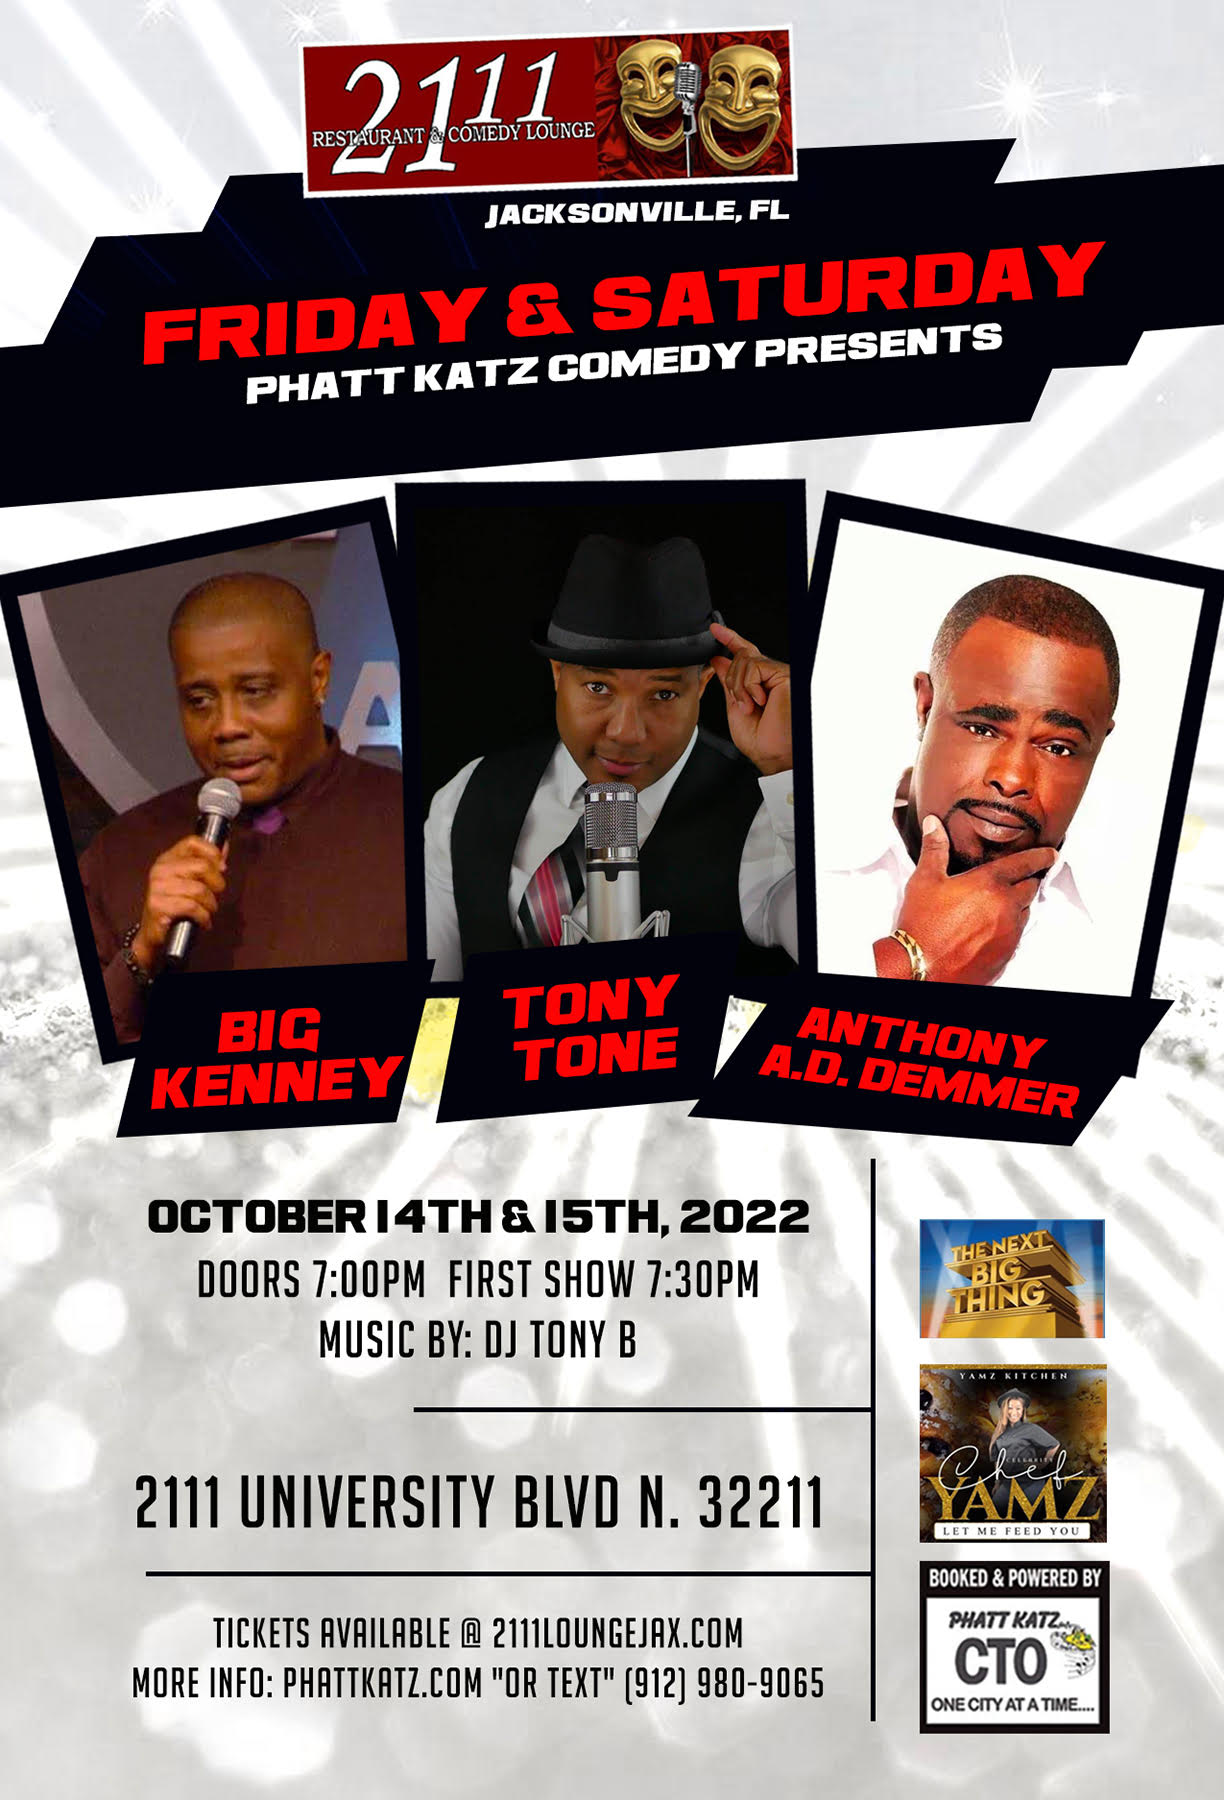 Tony Tone Big Kenney and Anthony A.D. Demmer Saturday